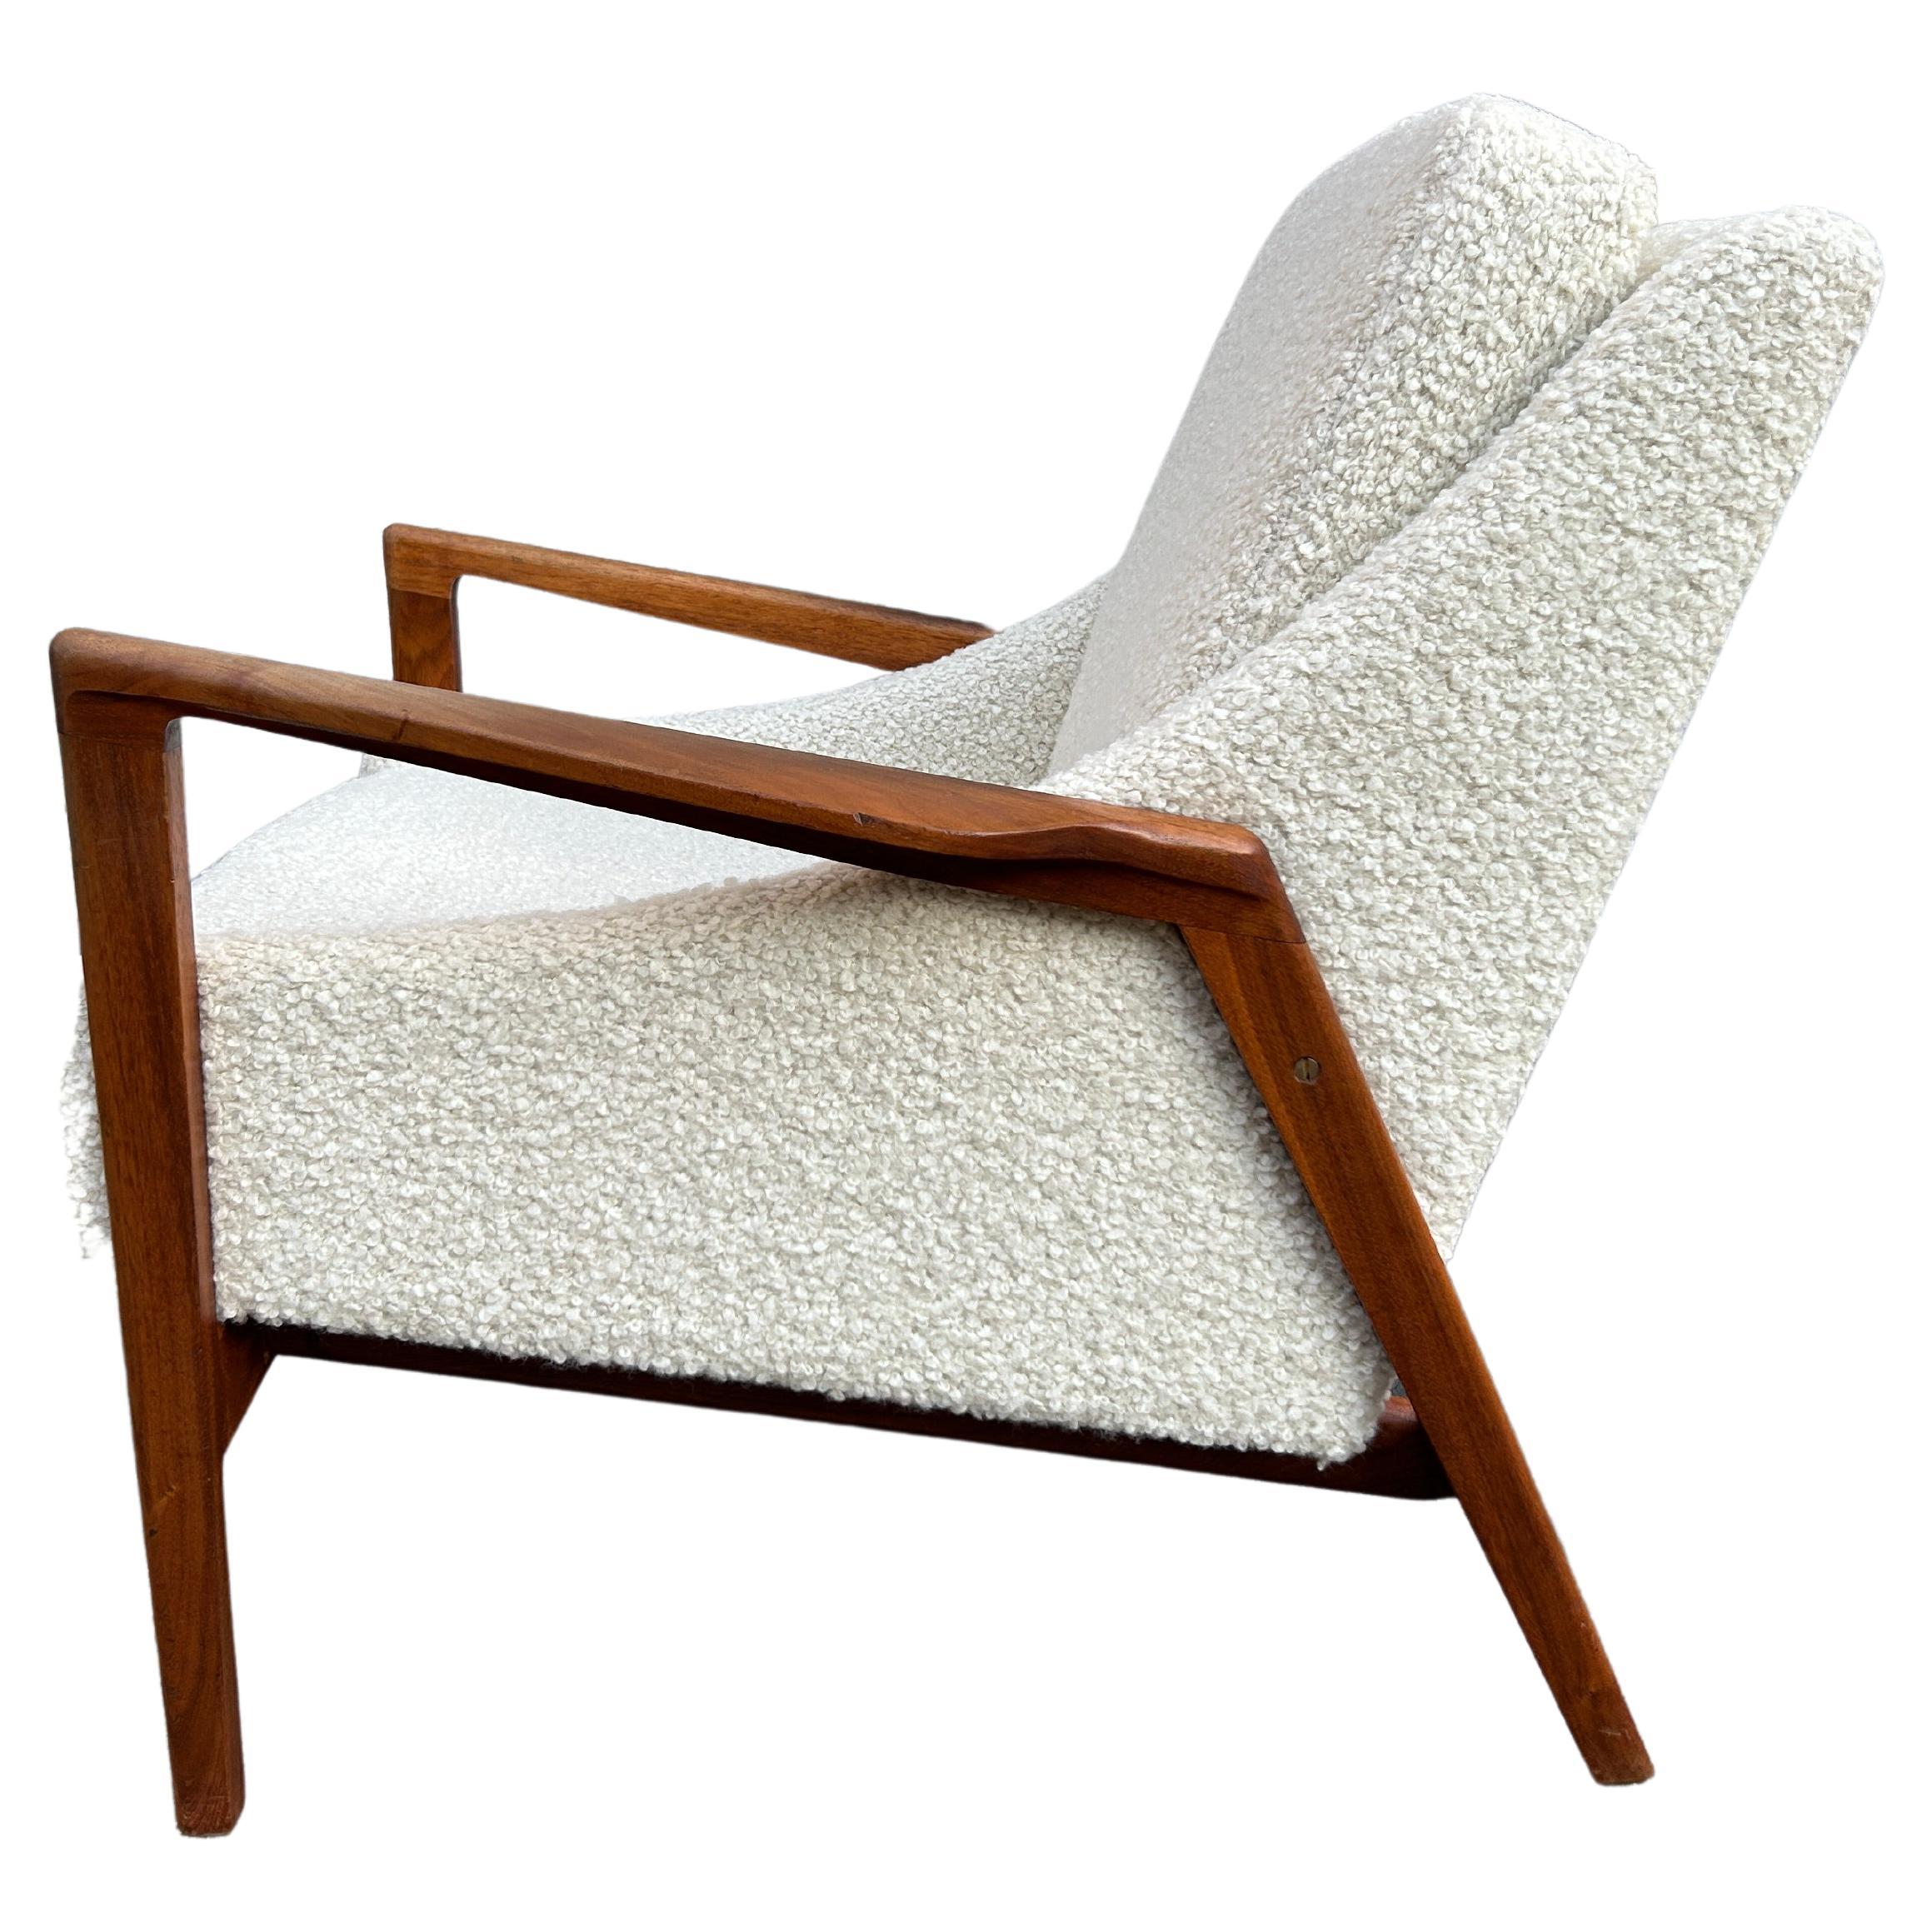 Mid Century Danish modern lounge chair in Boucle with wood frame. Beautiful designed Danish Lounge chair fully restored. In the manner of Ib Kofod Larsen. This chair was fully reupholstered with Holly Hunt Alpaca Boucle - Teddy bear. The wood frame